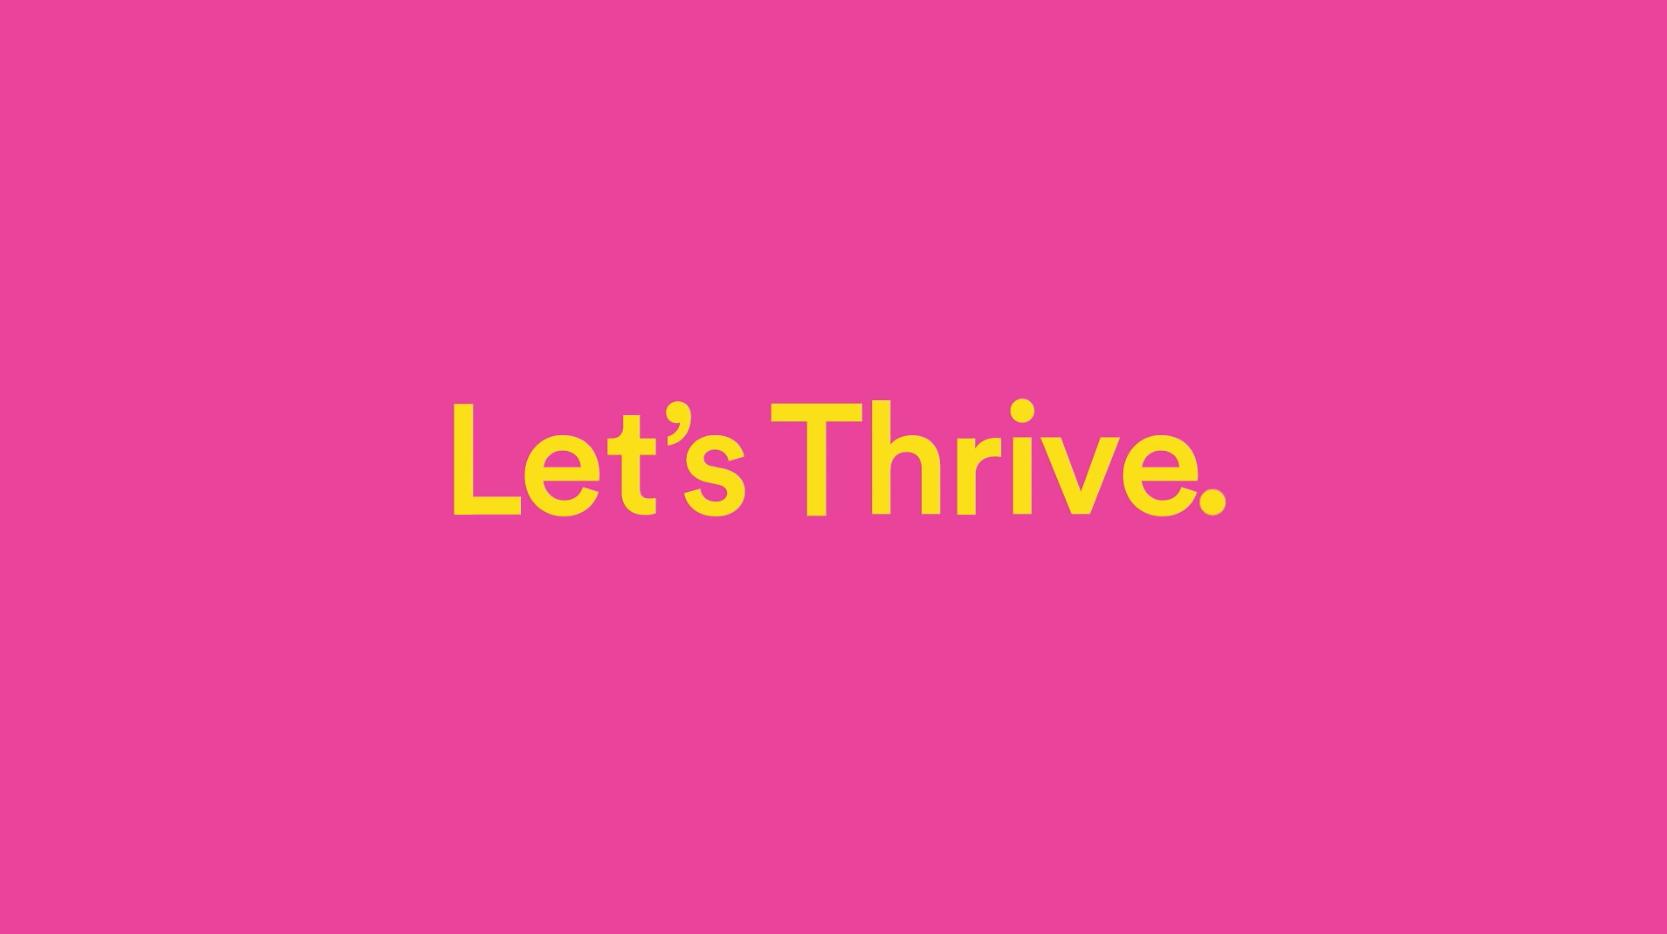 Let's Thrive